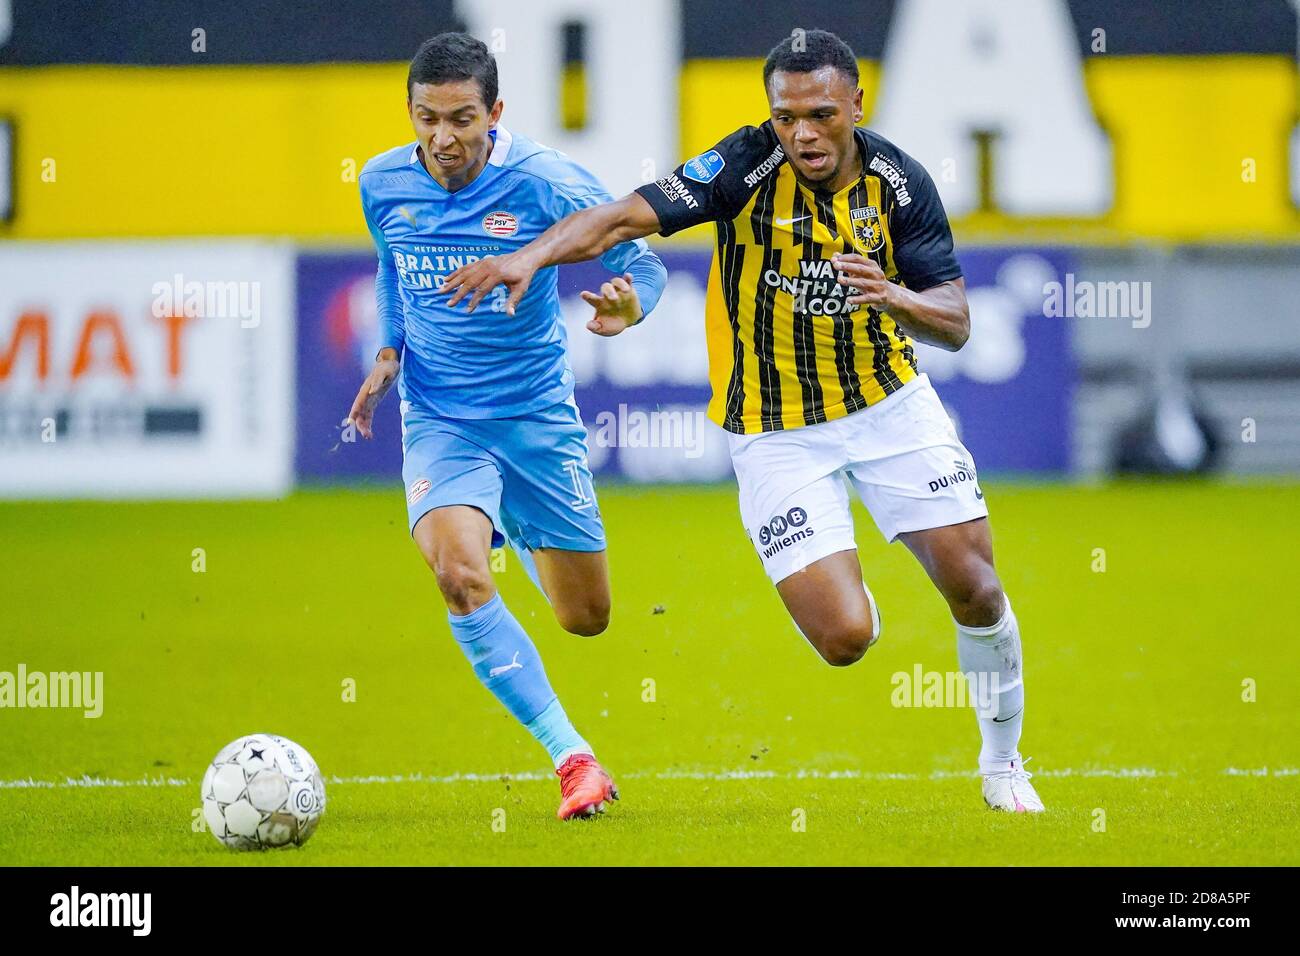 Mauro Junior of PSV, Lois Openda of Vitesse during the Netherlands championship Eredivisie football match between Vitesse and PSV on October 25, 202 C Stock Photo